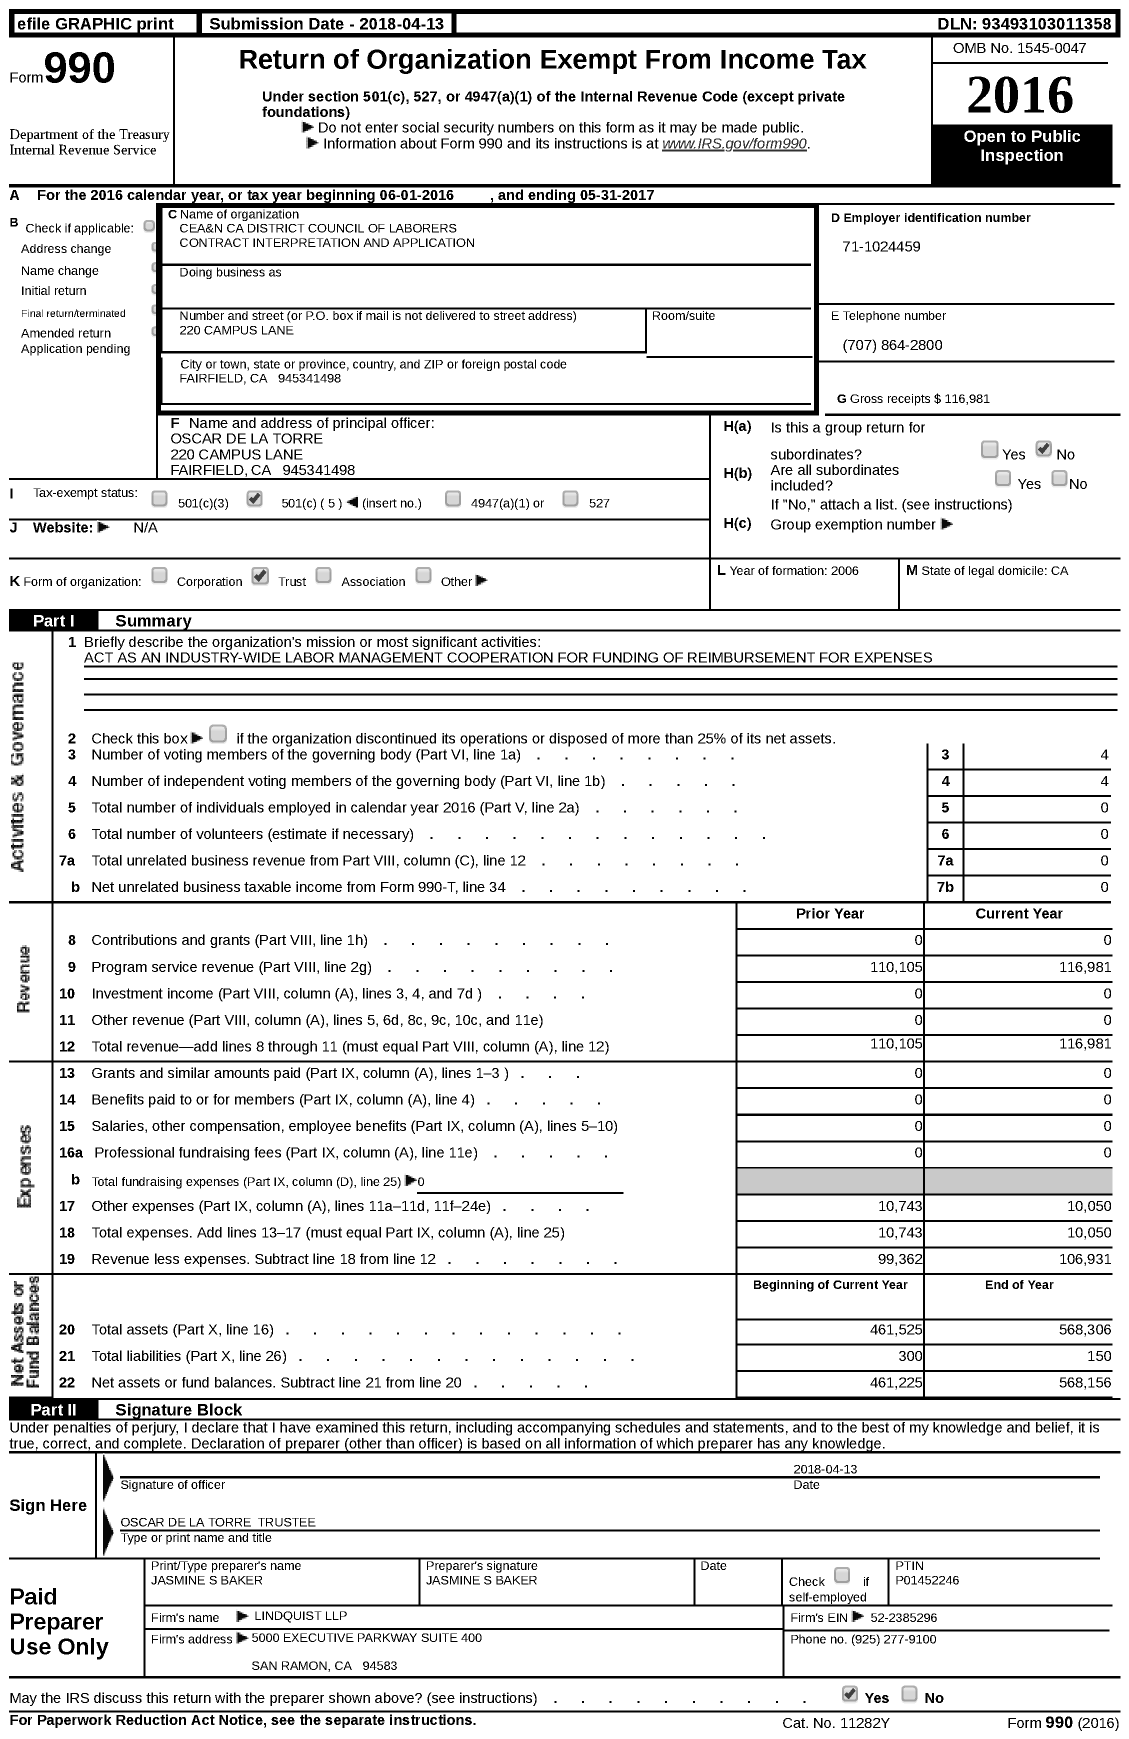 Image of first page of 2016 Form 990 for Cea&n Ca District Council of Laborers Contract Interpretation and Application